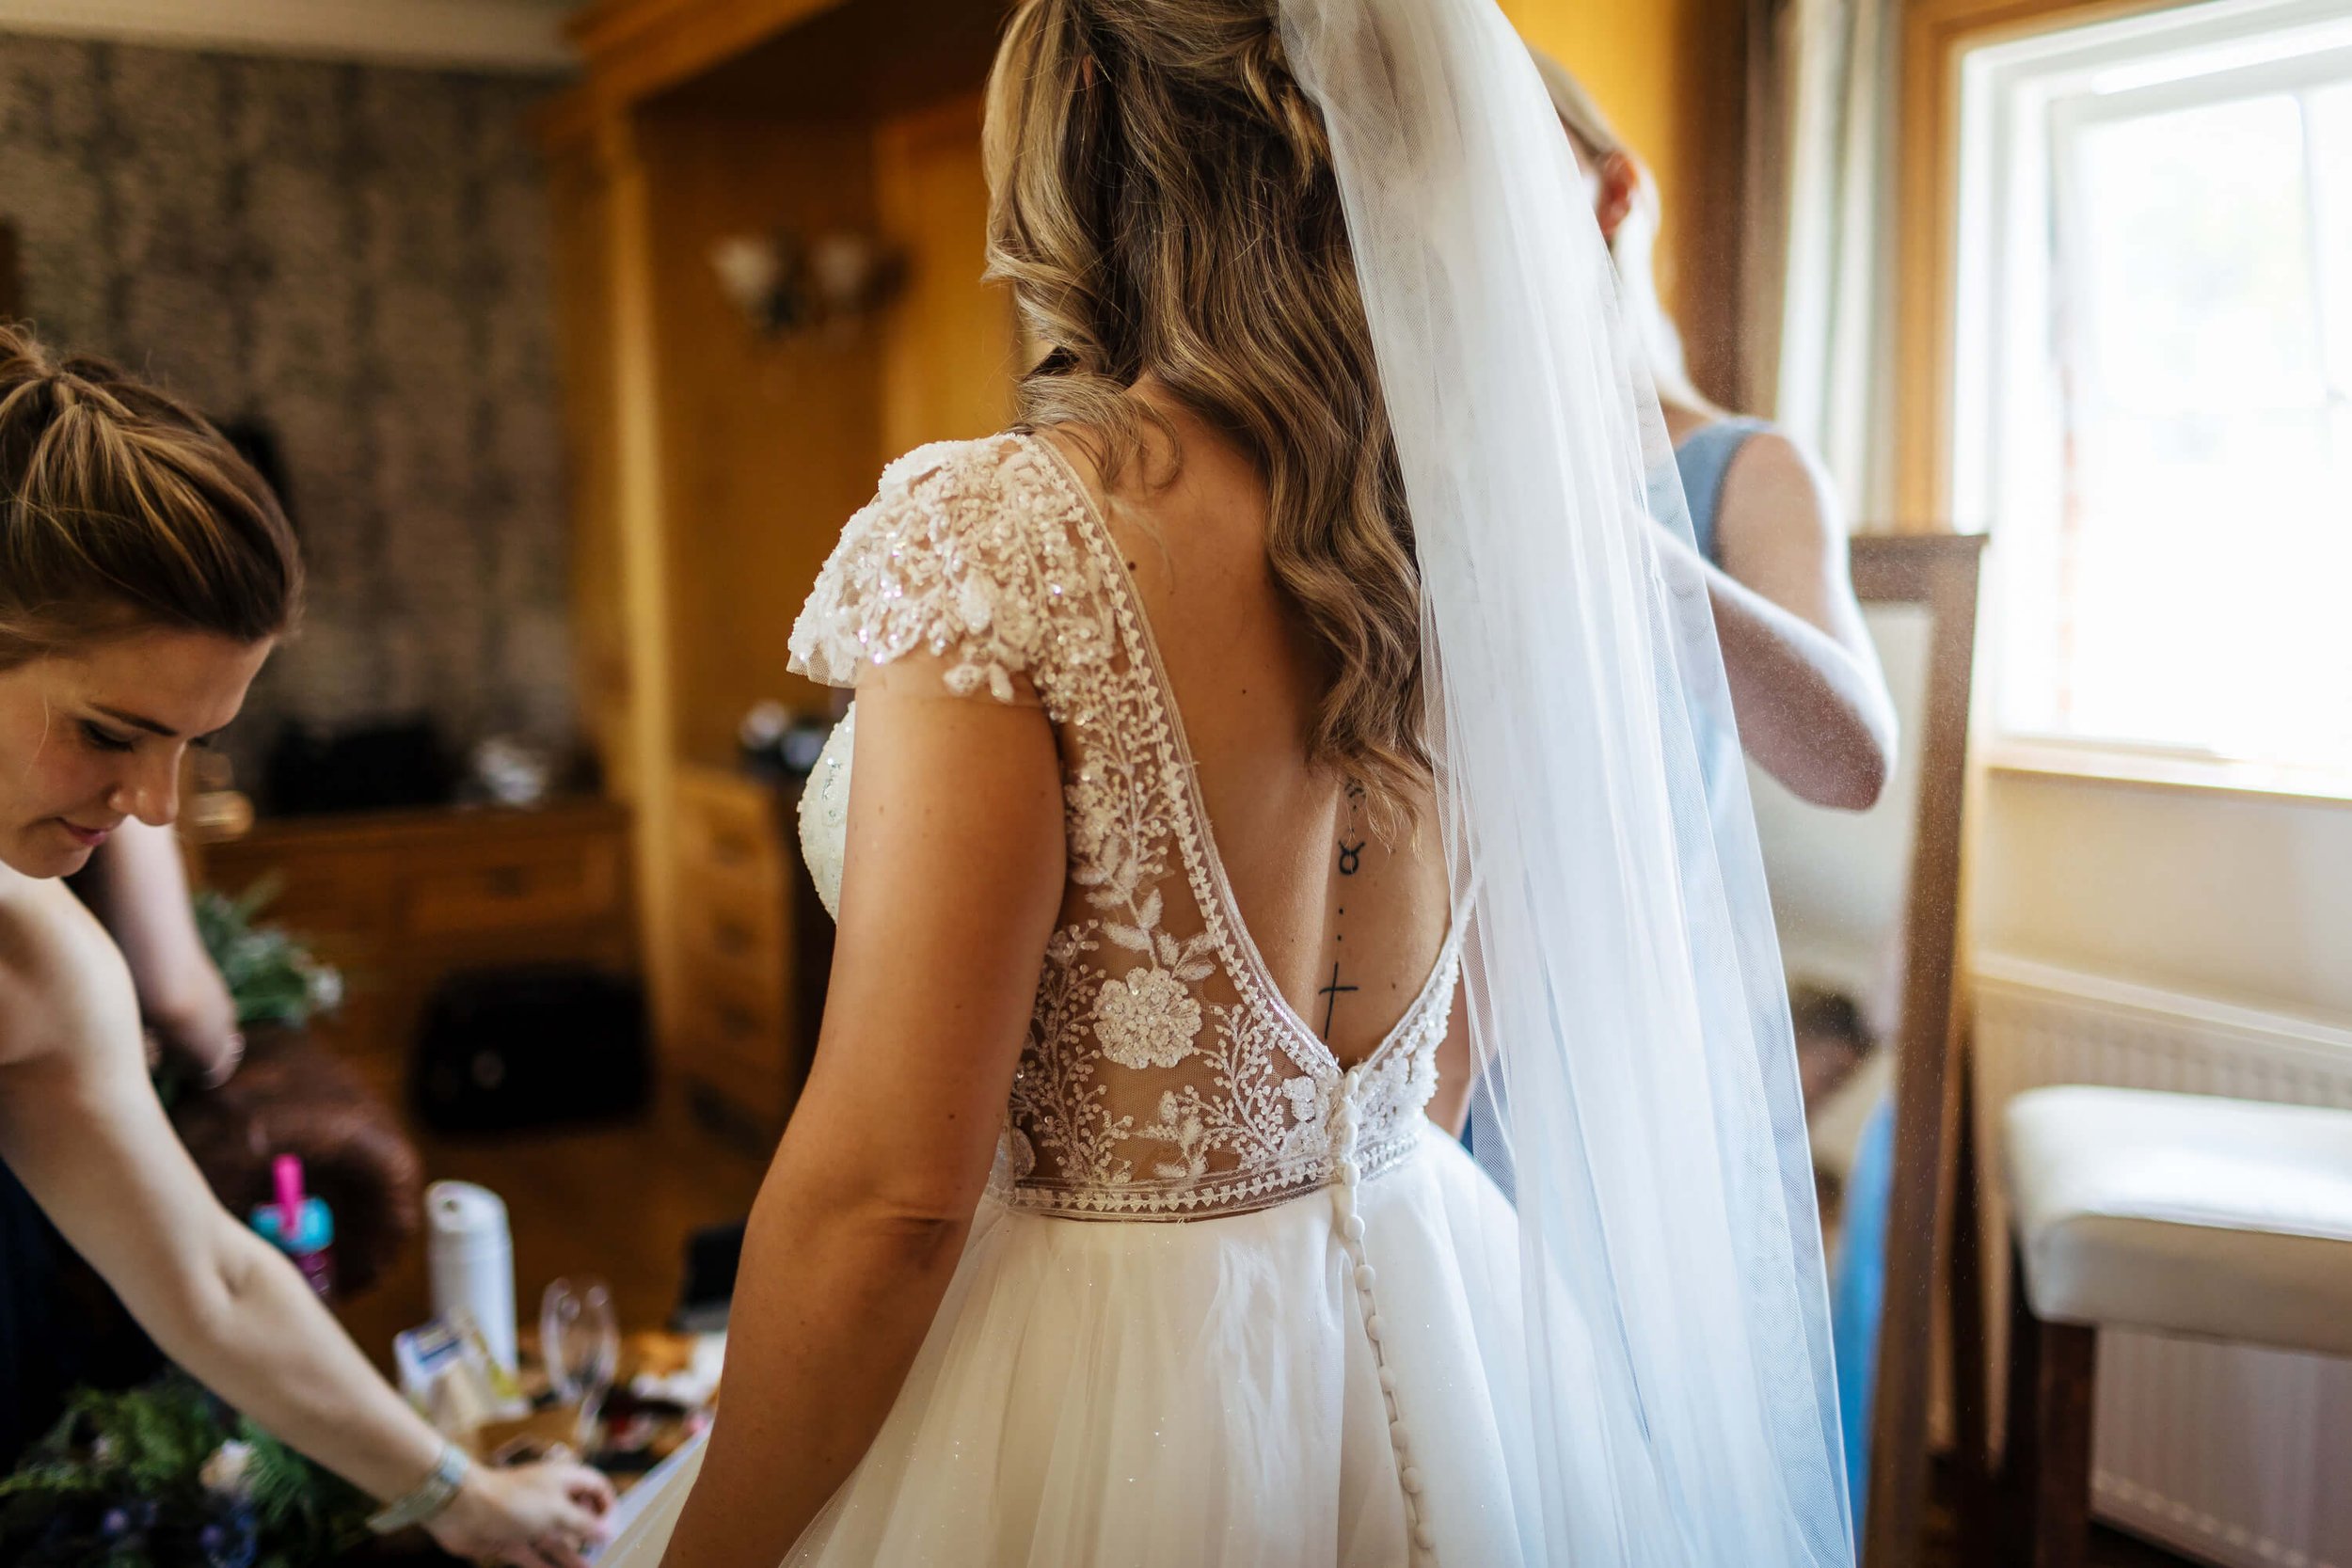 The back of the bride's wedding dress